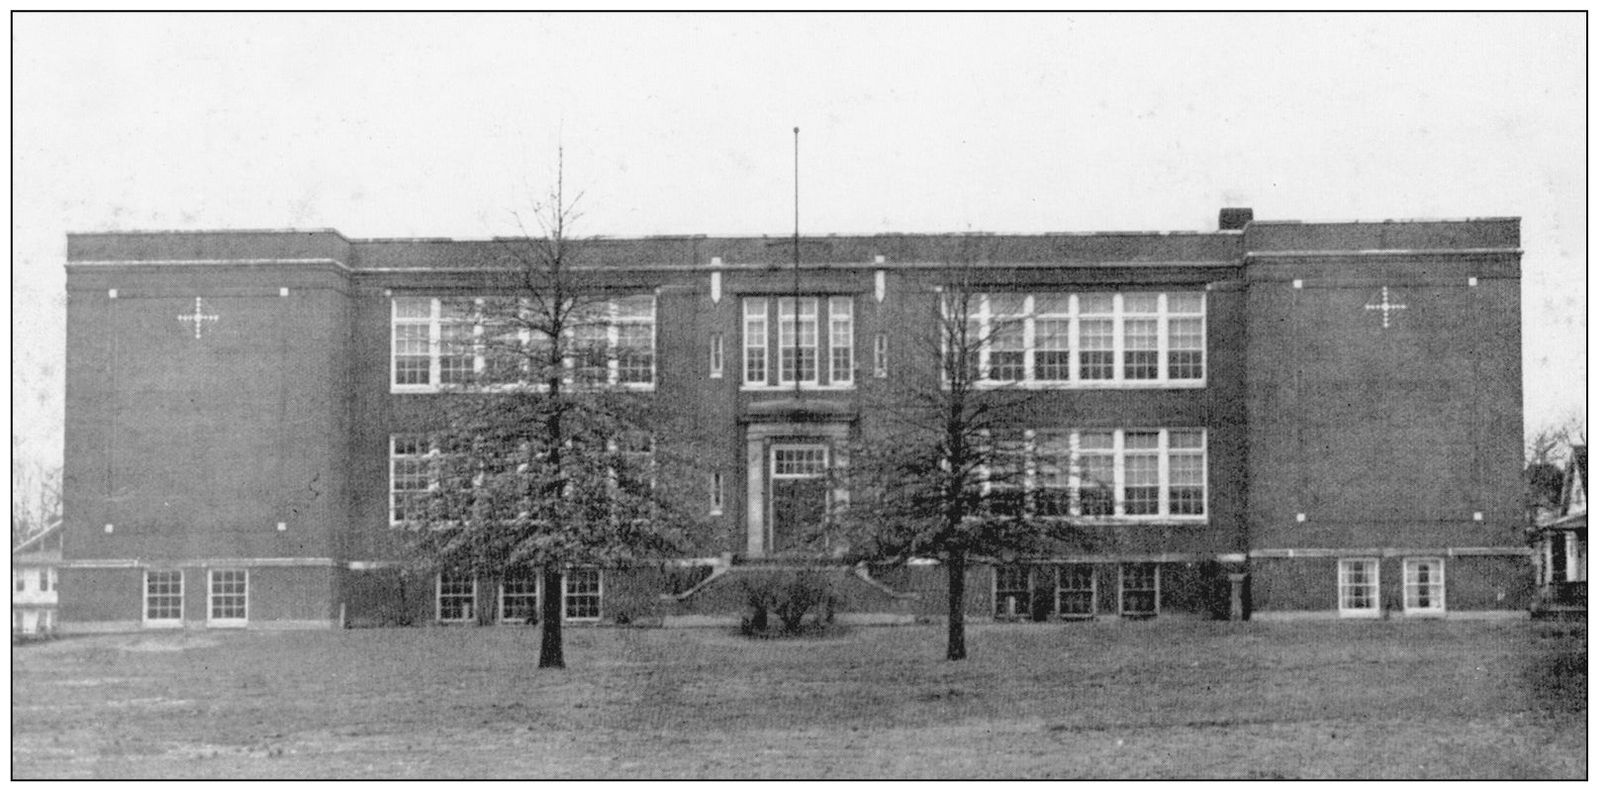 This Falmouth School building served the Falmouth community from about 1928 - photo 10